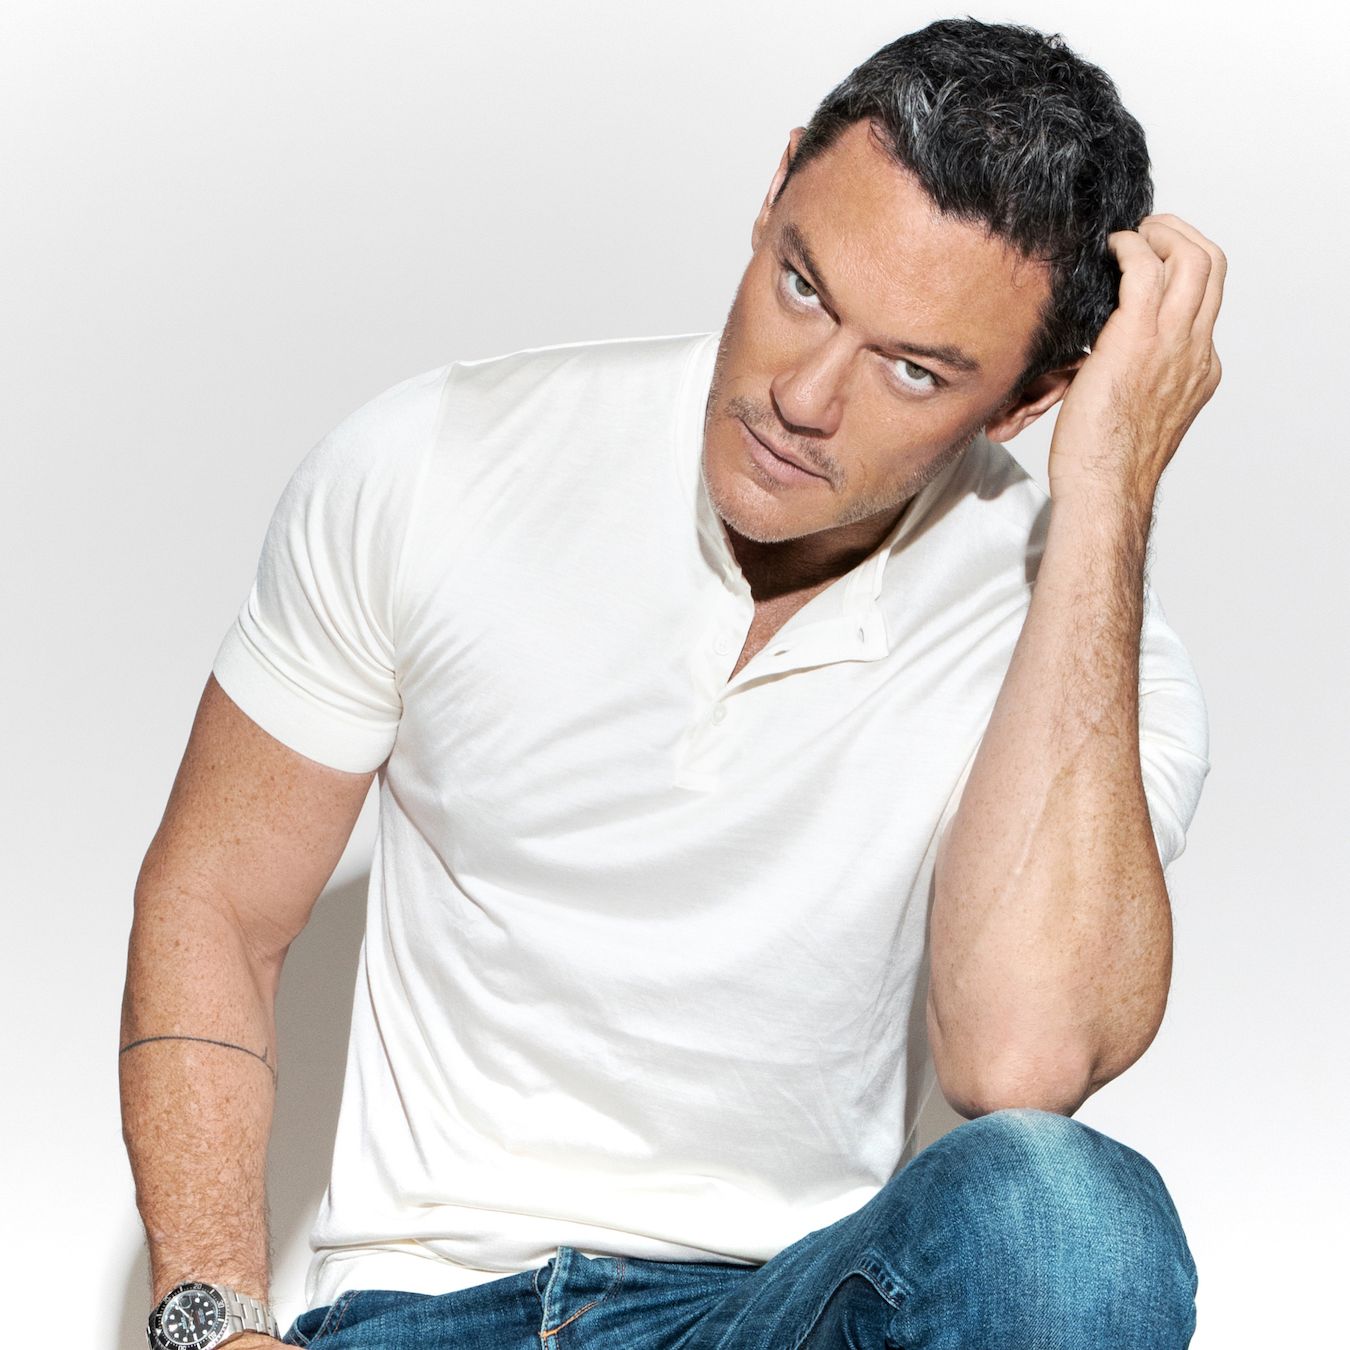 Luke Evans Doesn't Want to Take It Easy